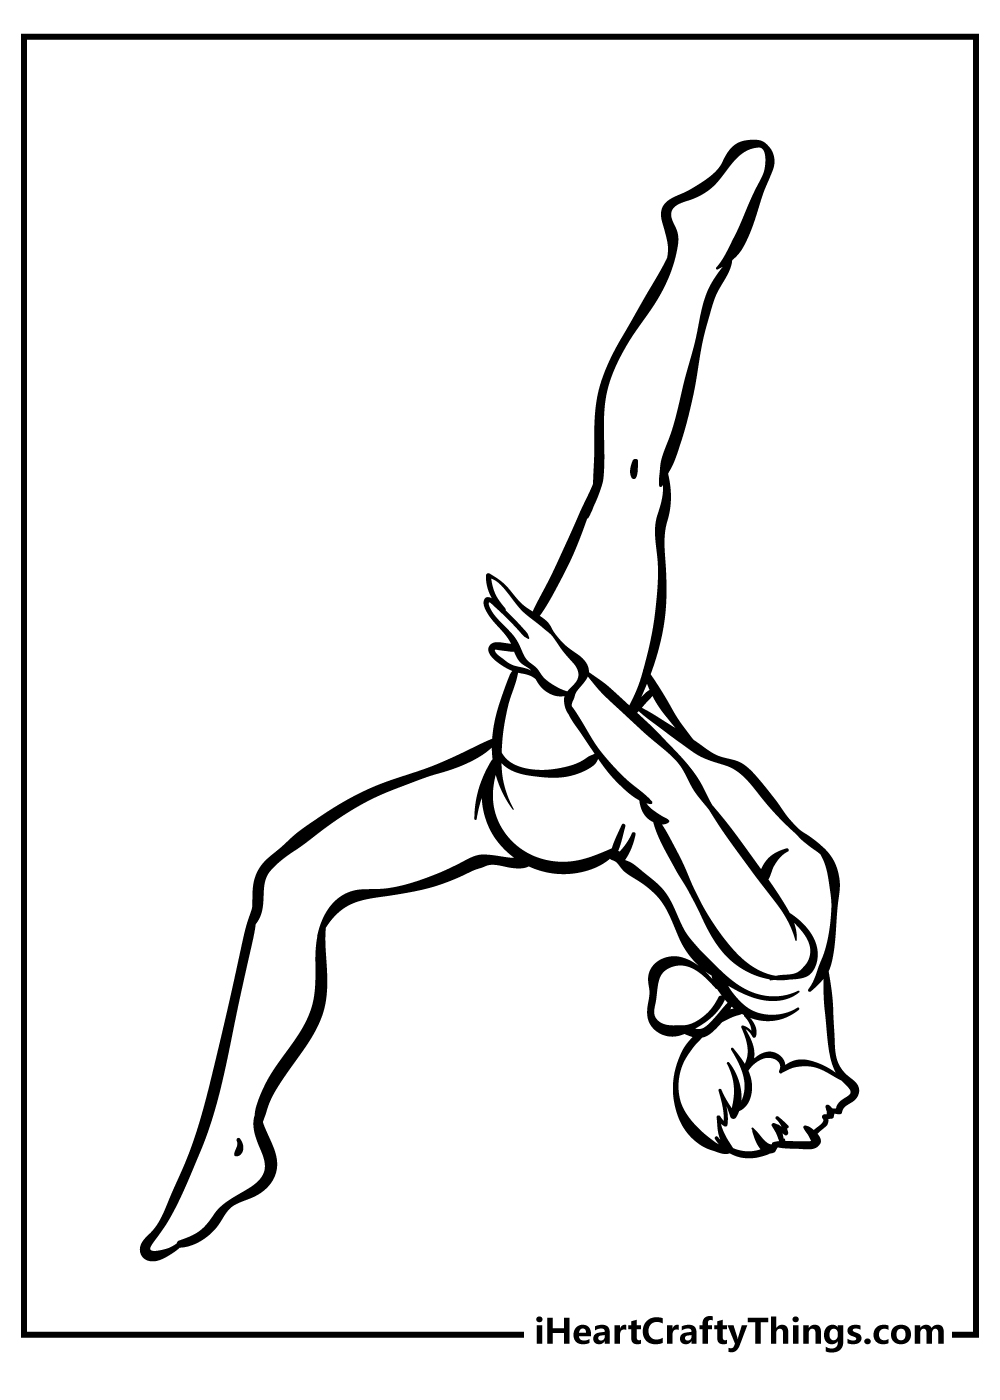 Gymnastics Coloring Pages for preschoolers free printable